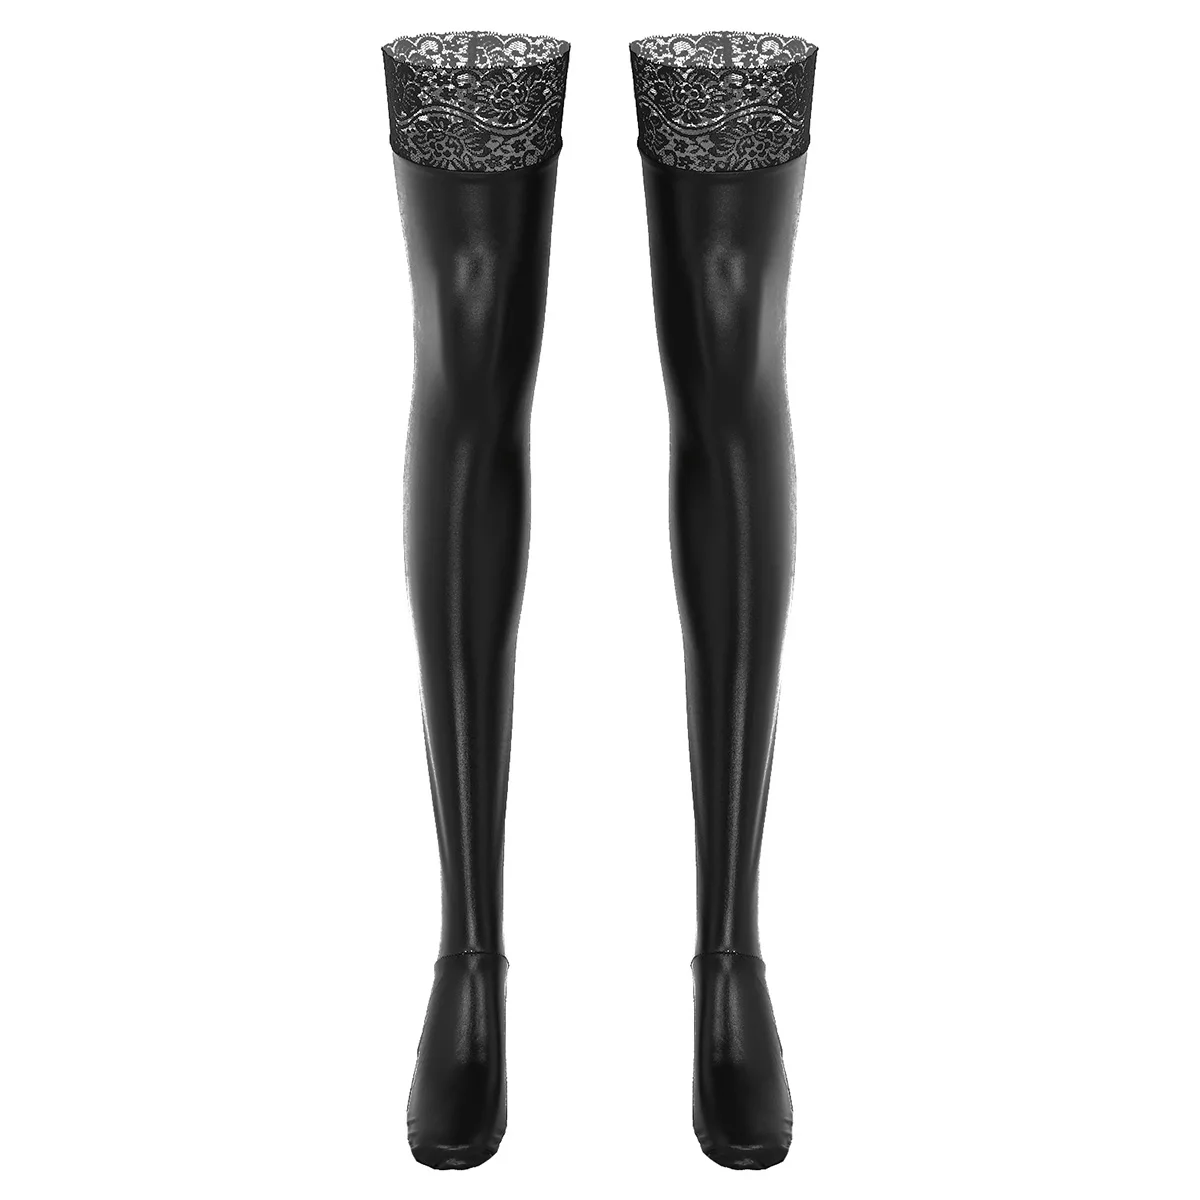 

Women Thigh High Stockings Sexy Lace Floral Latex Long Socks Wet Look Patent Leather Stocking Anti Slip Stay Up Hosiery Lingerie